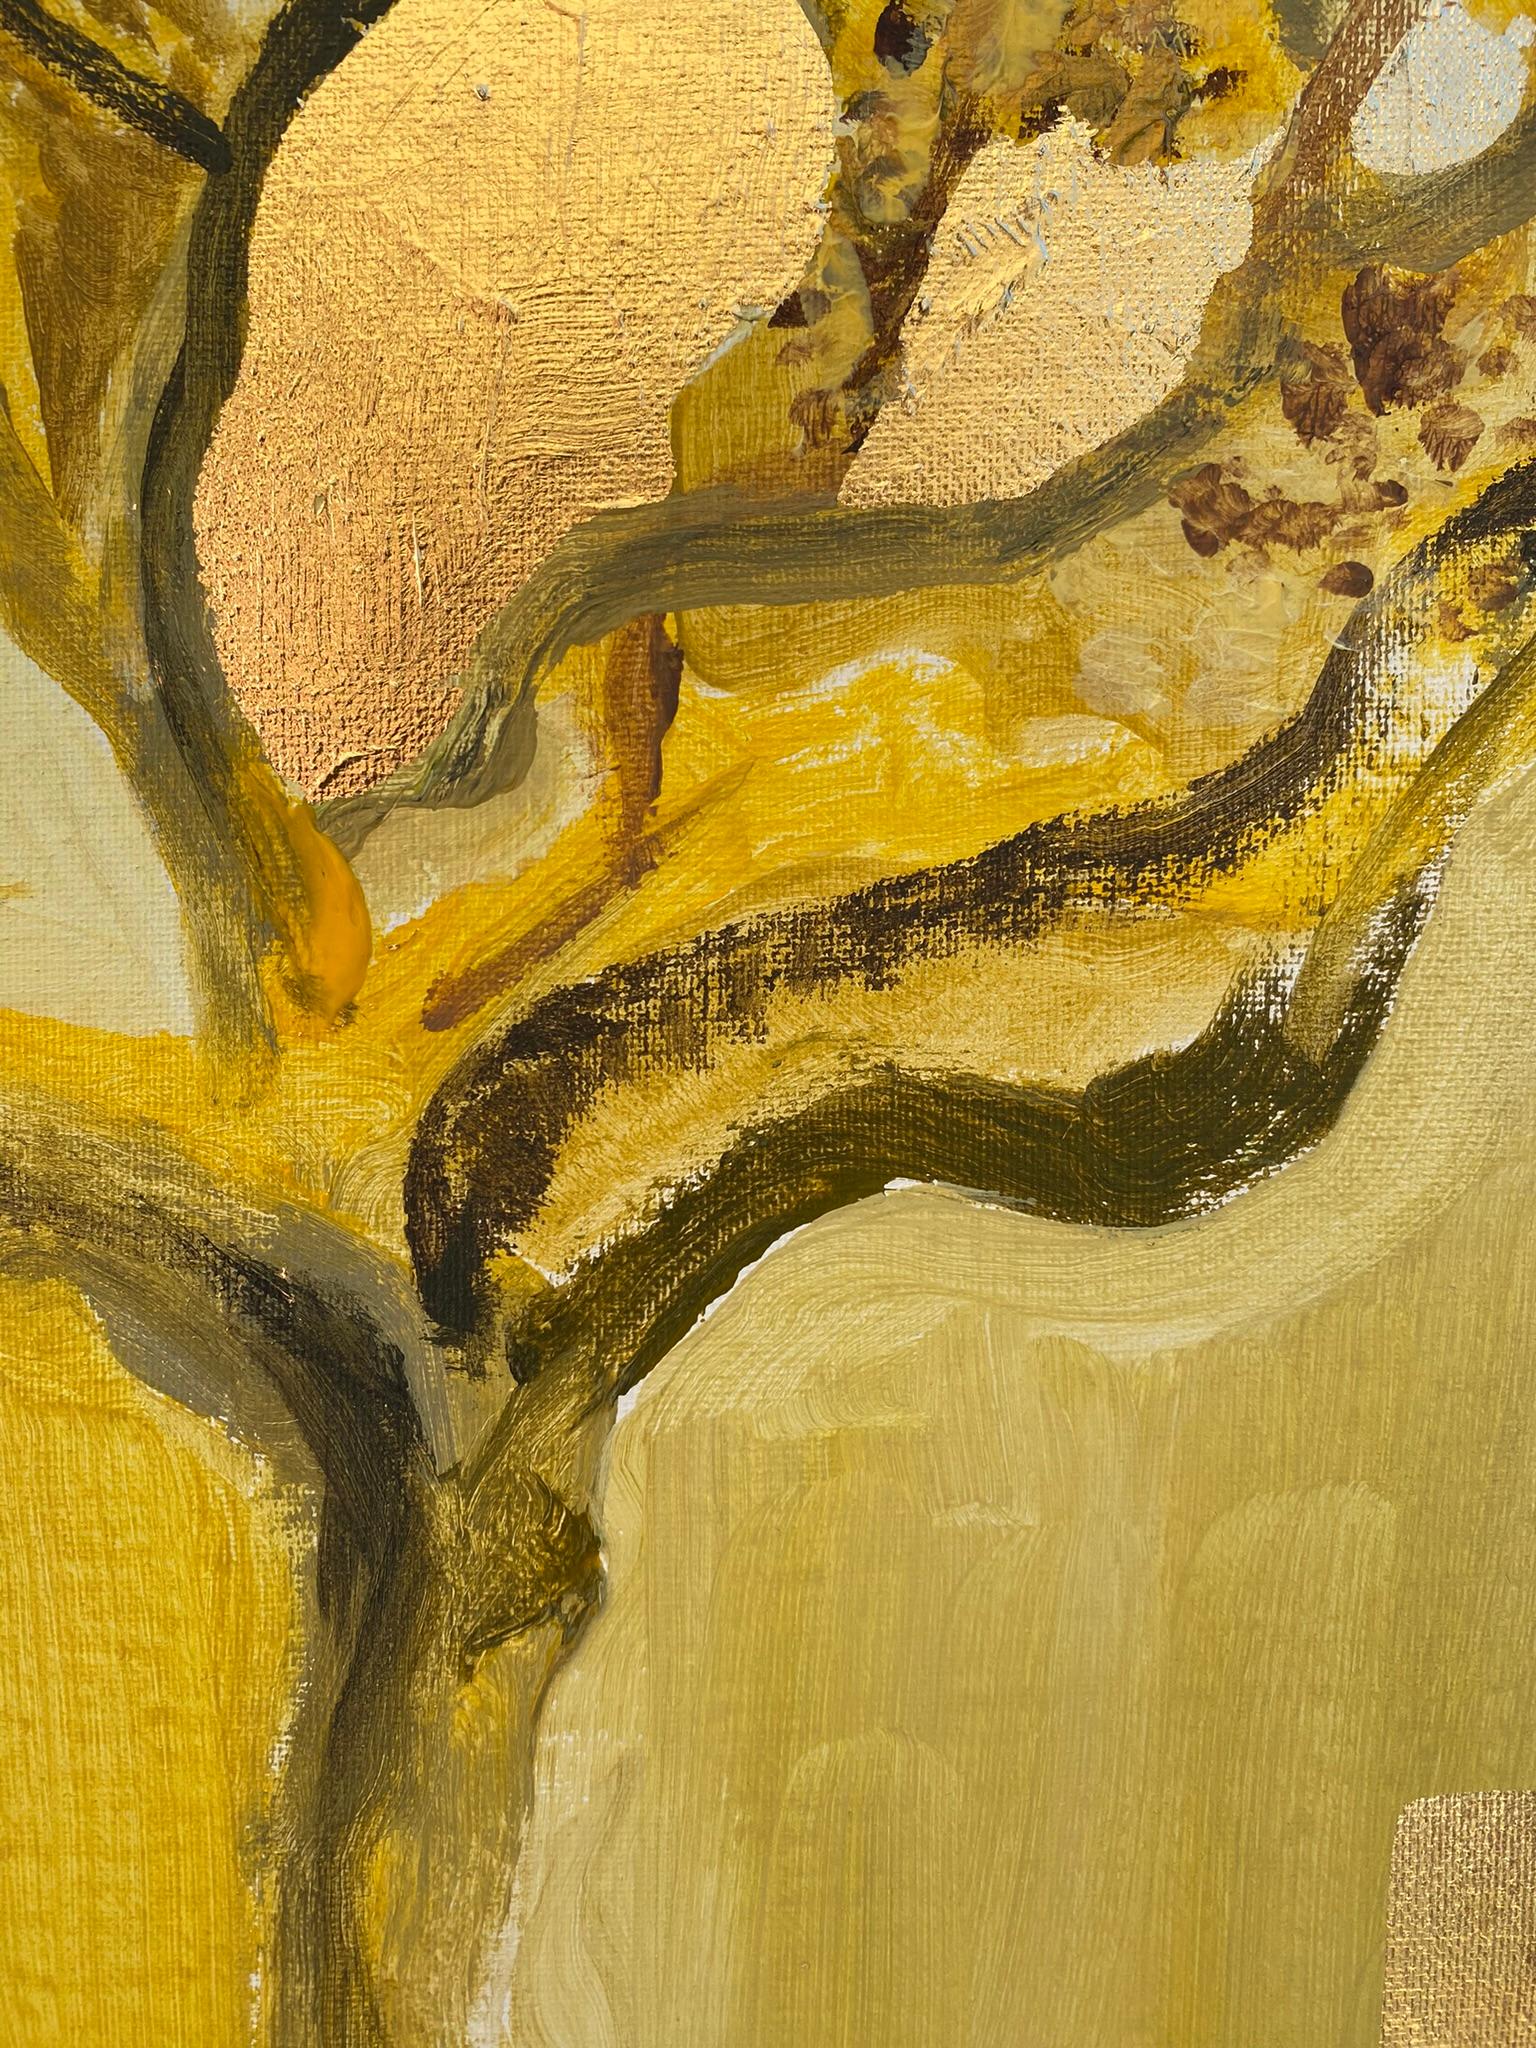 Original-Primary Yellow-Sunlit-Abstract-Expression-Gold Leaf-UK Awarded Artist 3